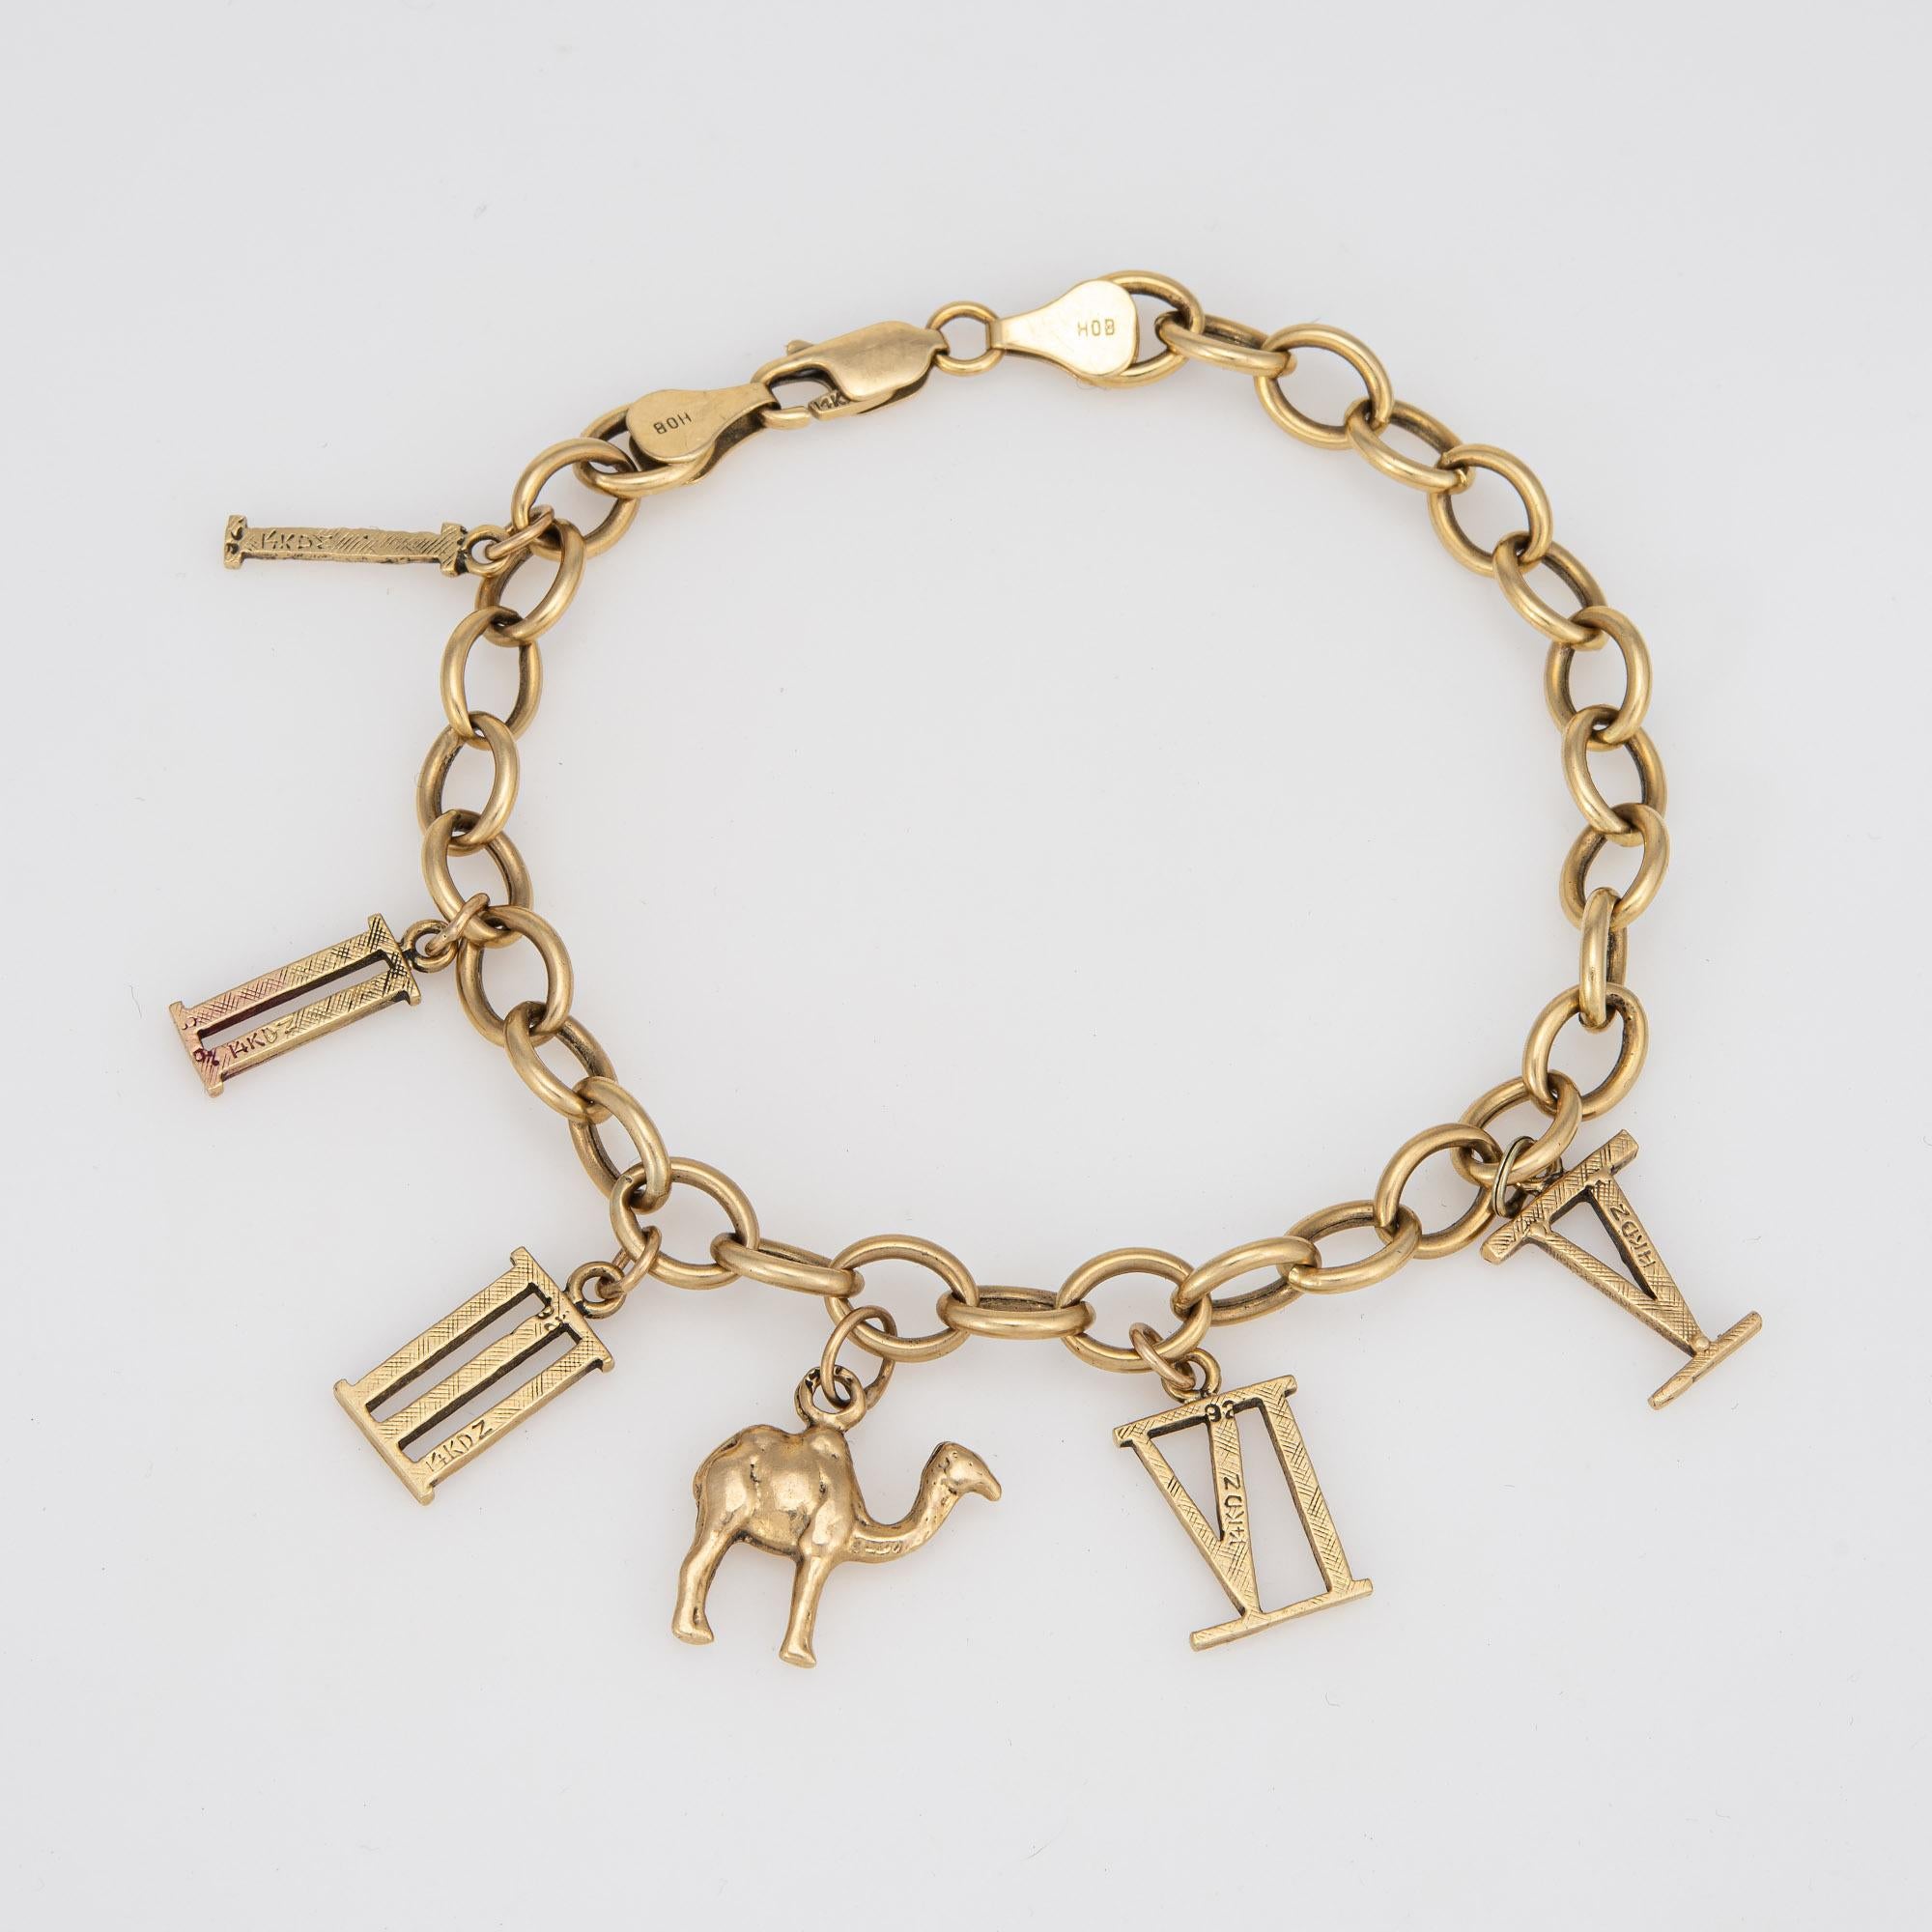 Stylish and finely detailed vintage charm bracelet crafted in 14 karat yellow gold. 

The bracelet features 6 charms with a Camel and Roman Numbers from 1-5. The bracelet is great worn alone as a statement piece or layered with your fine jewelry